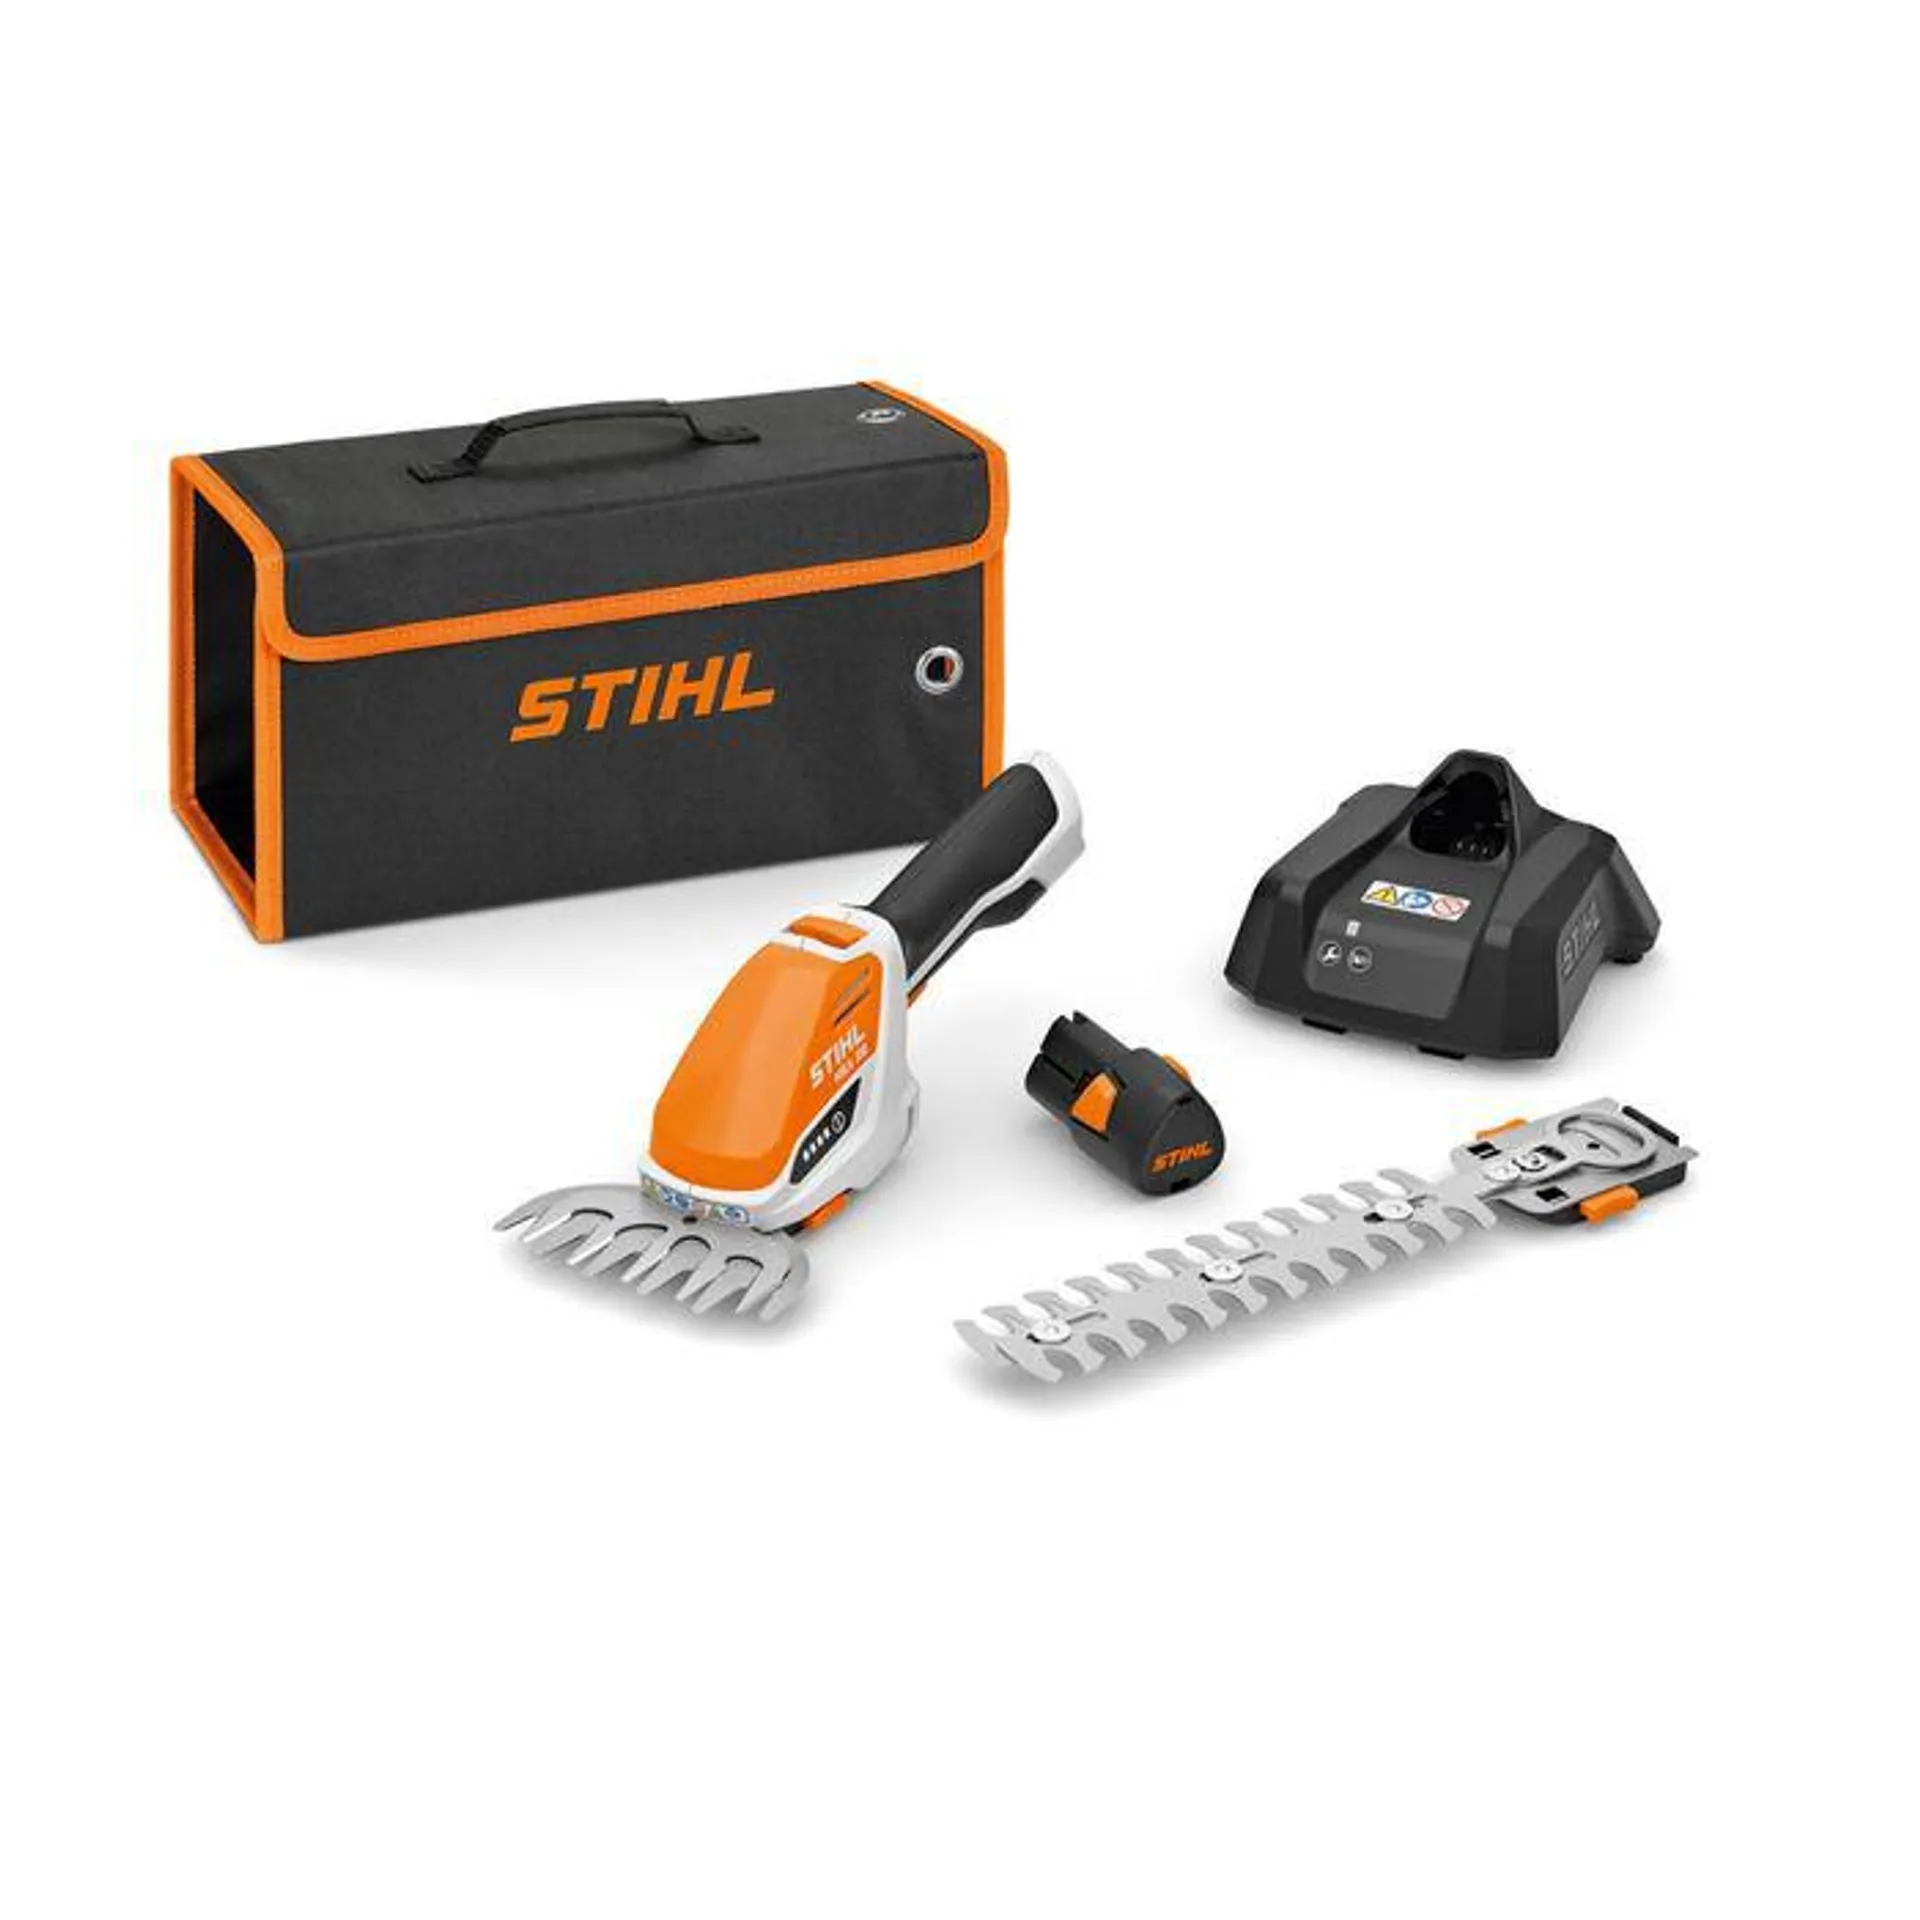 STIHL HSA 26 Small Battery Hedge Trimmer & Grass Trimmer Kit